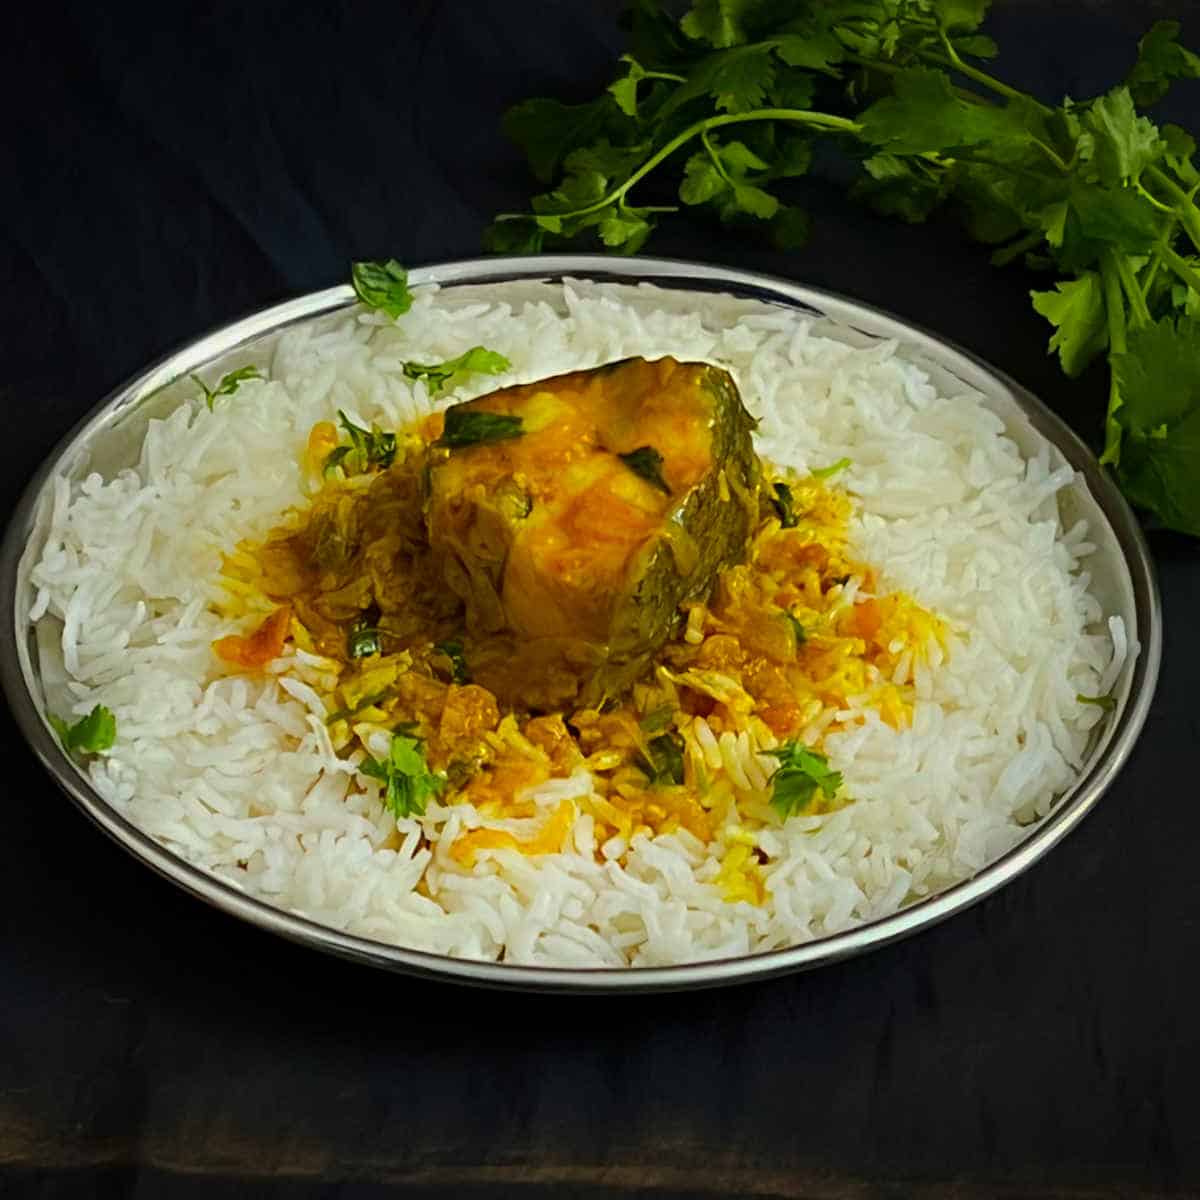 Fish curry served on a bed of basmati rice in a steel plate.